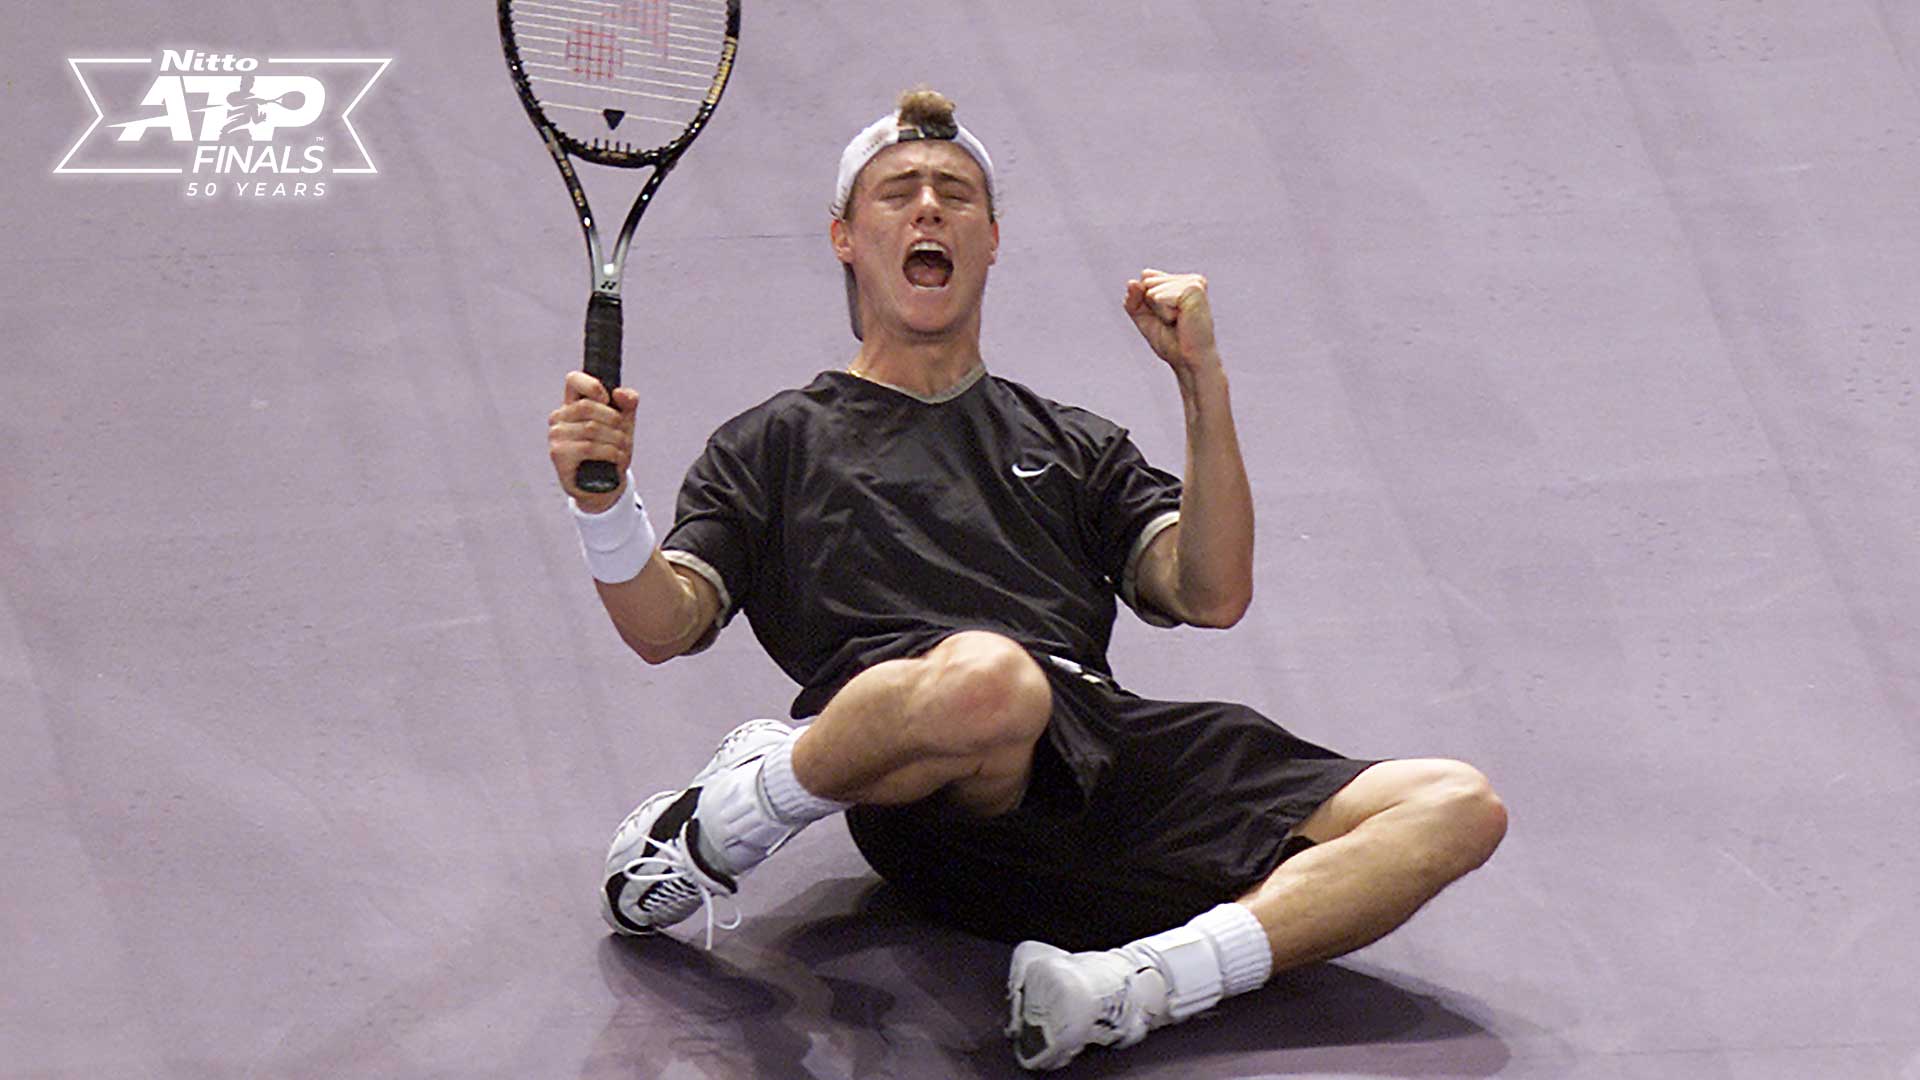 On home soil in Sydney in 2001, Lleyton Hewitt wins the first of two consecutive Tennis Masters Cup titles.